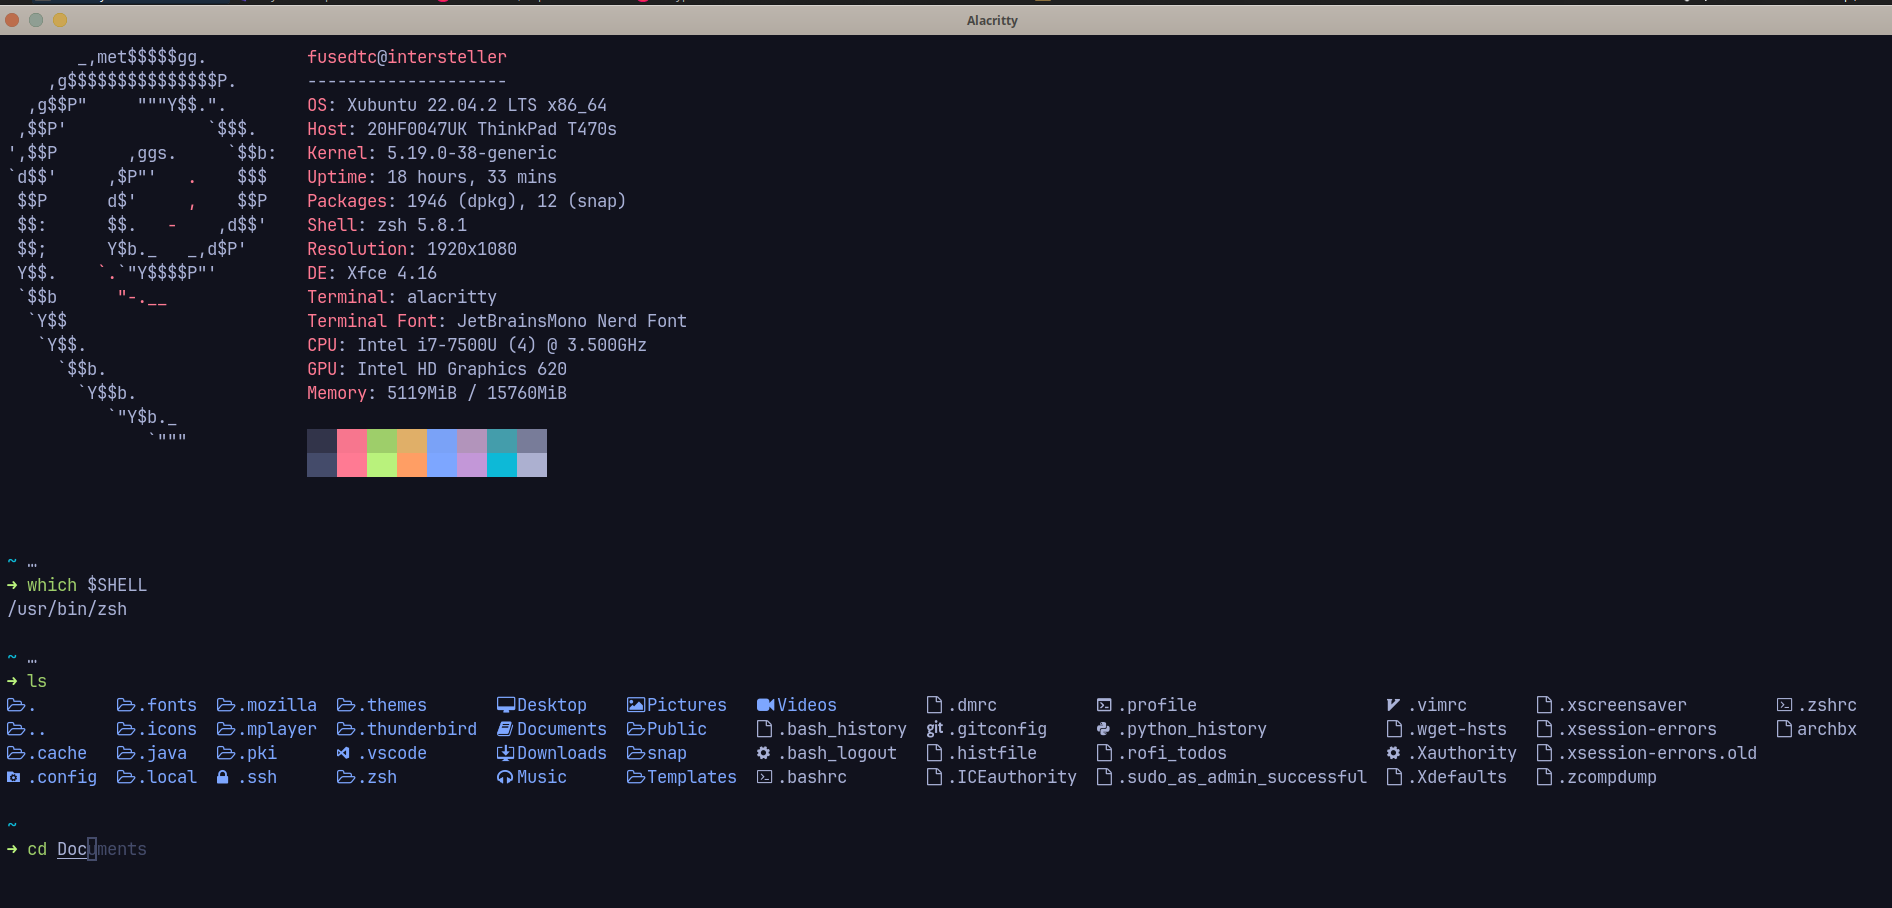 My terminal (Alacritty) showing my shell, and some zsh plugs - LSD, syntax-highlighting and autosuggestions